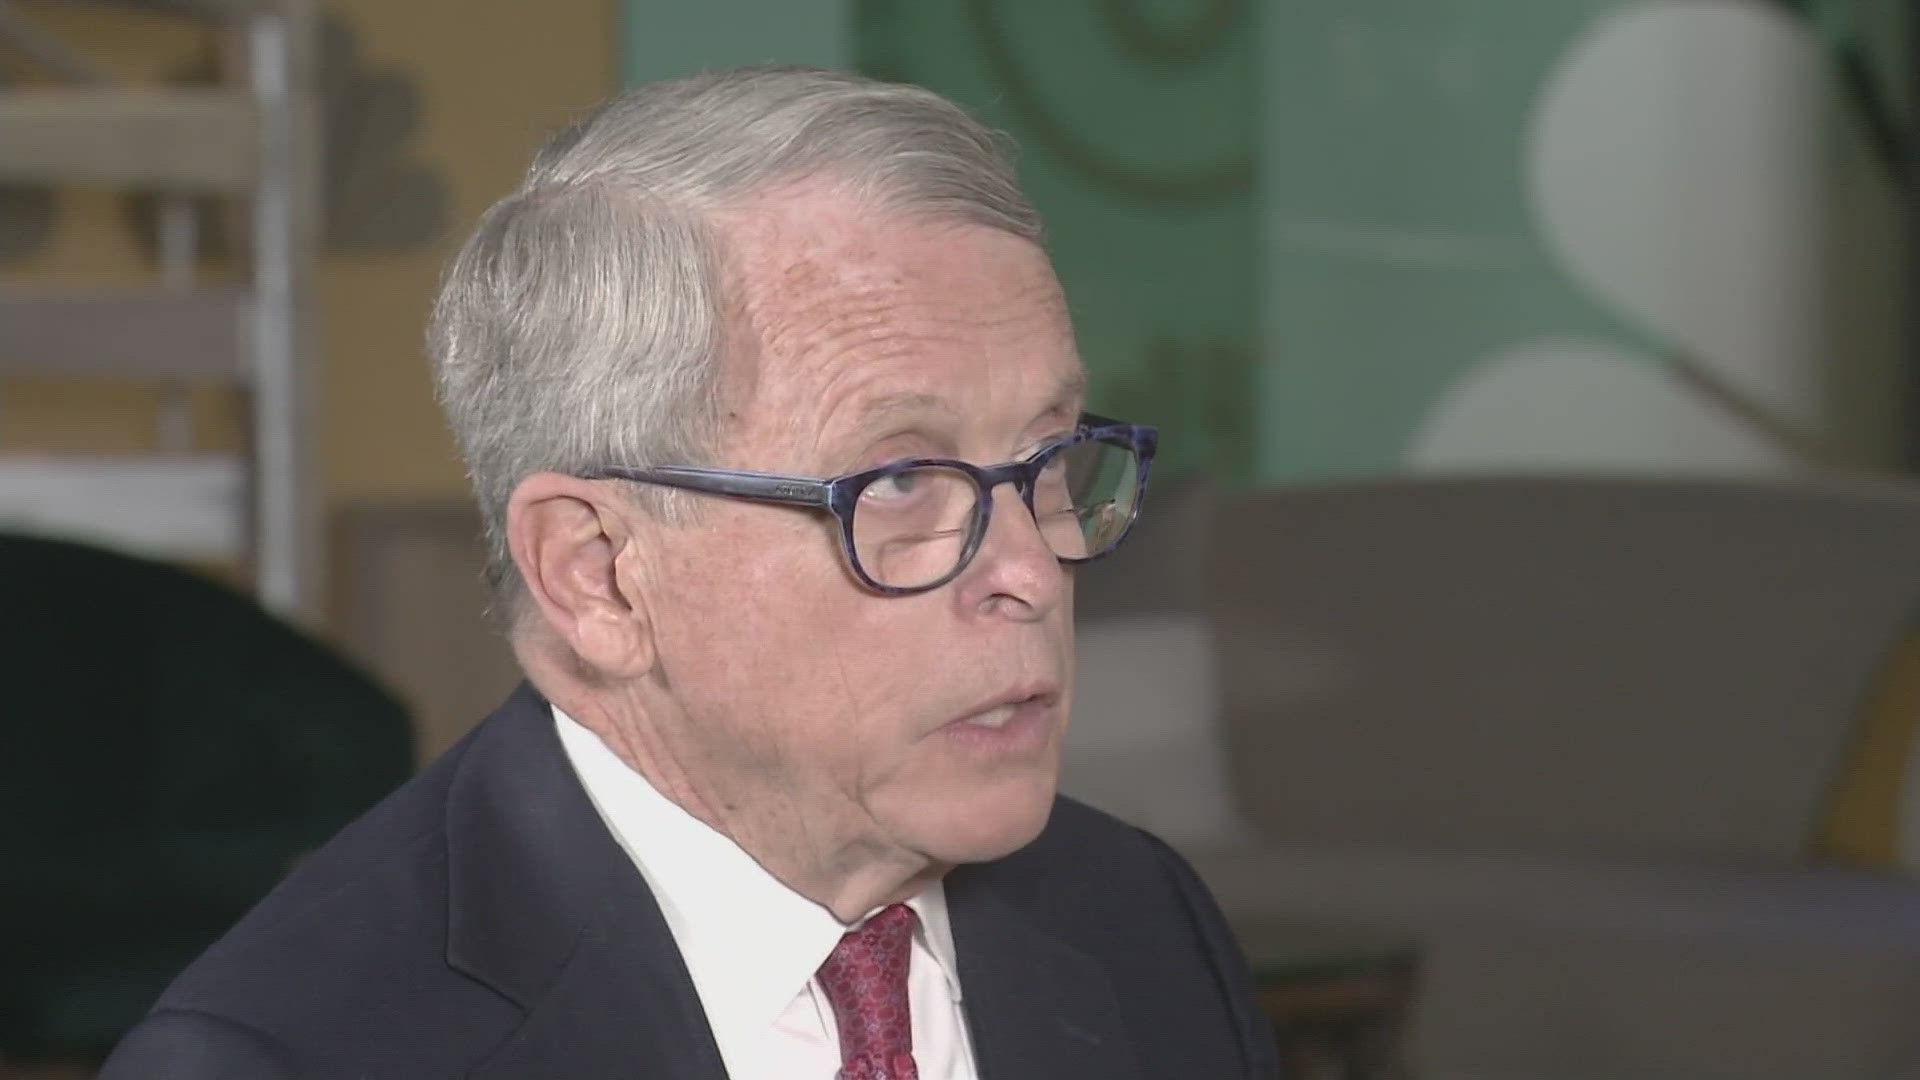 'We wanted to set up a permanent clinic for the people of the community so that anybody now can go in and get a baseline,' Gov. DeWine said.